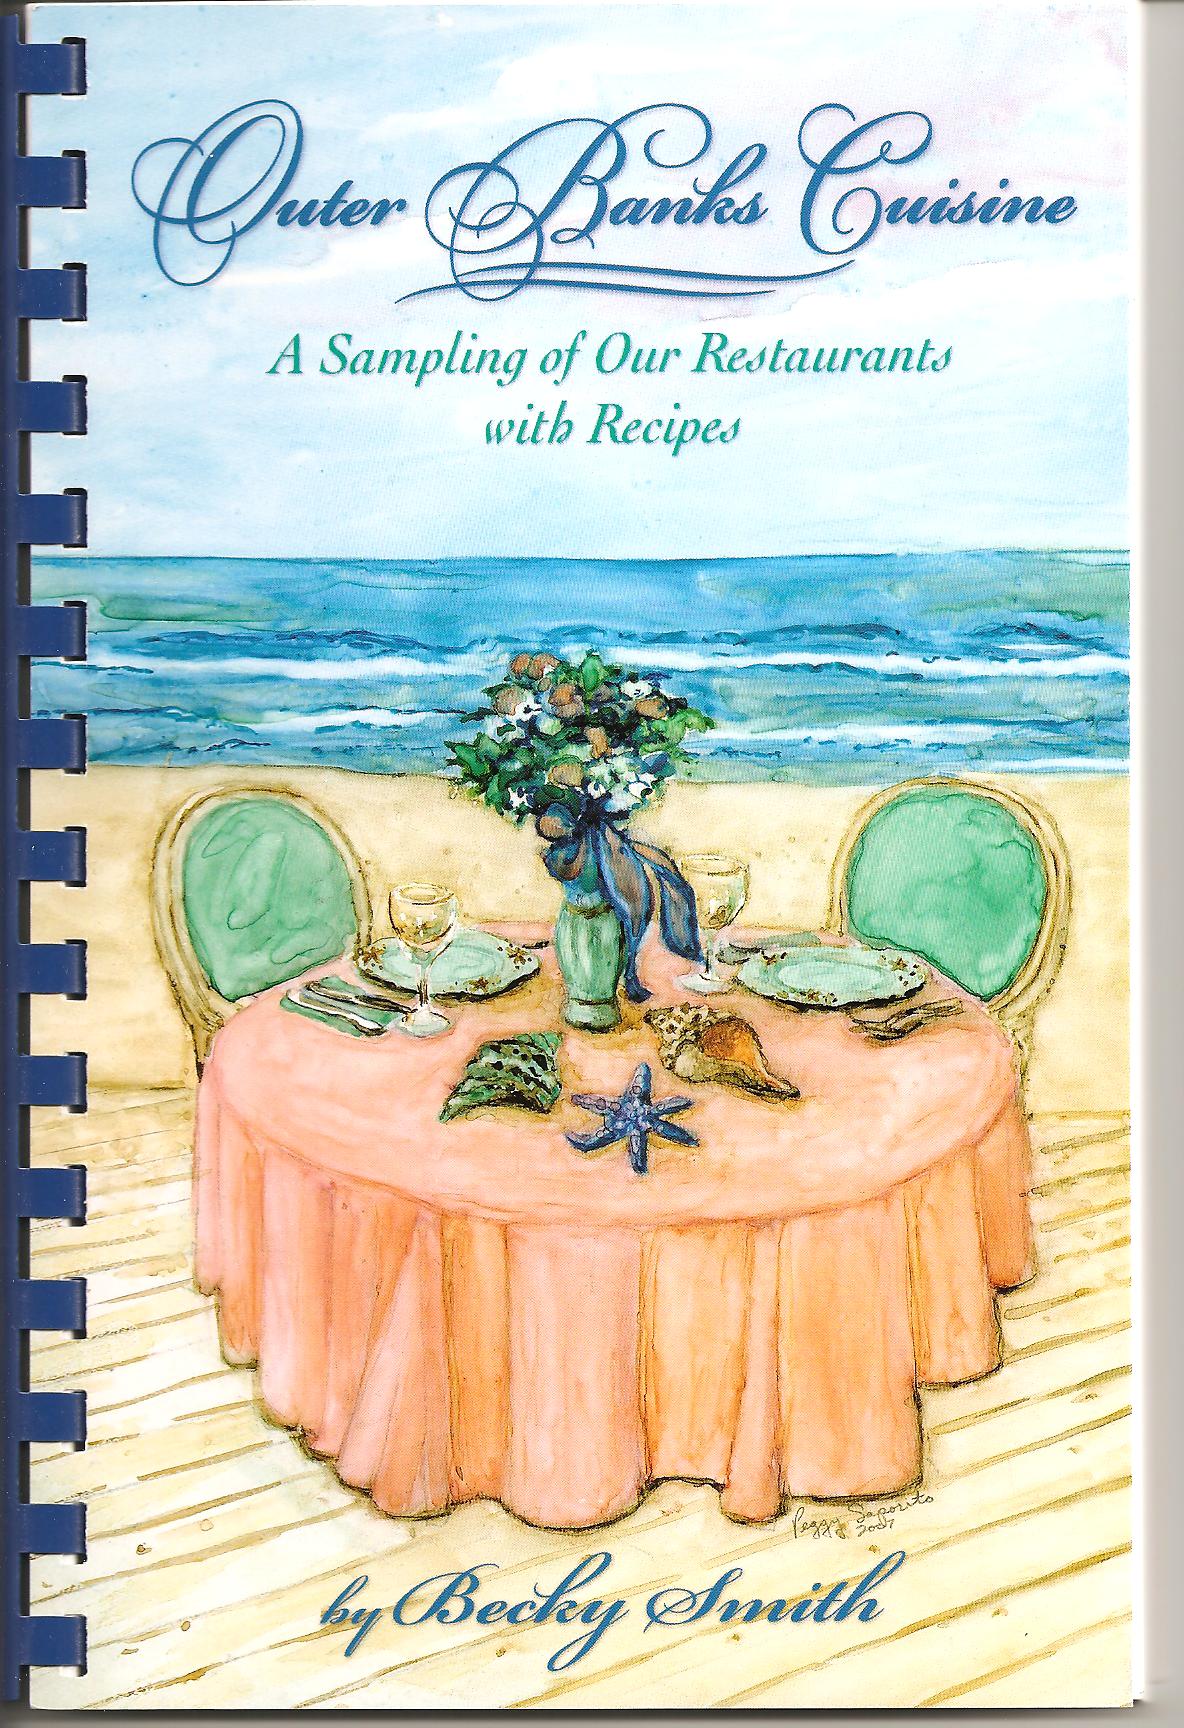 Outer Banks Cuisine - A Sampling of Restaurants with recipes